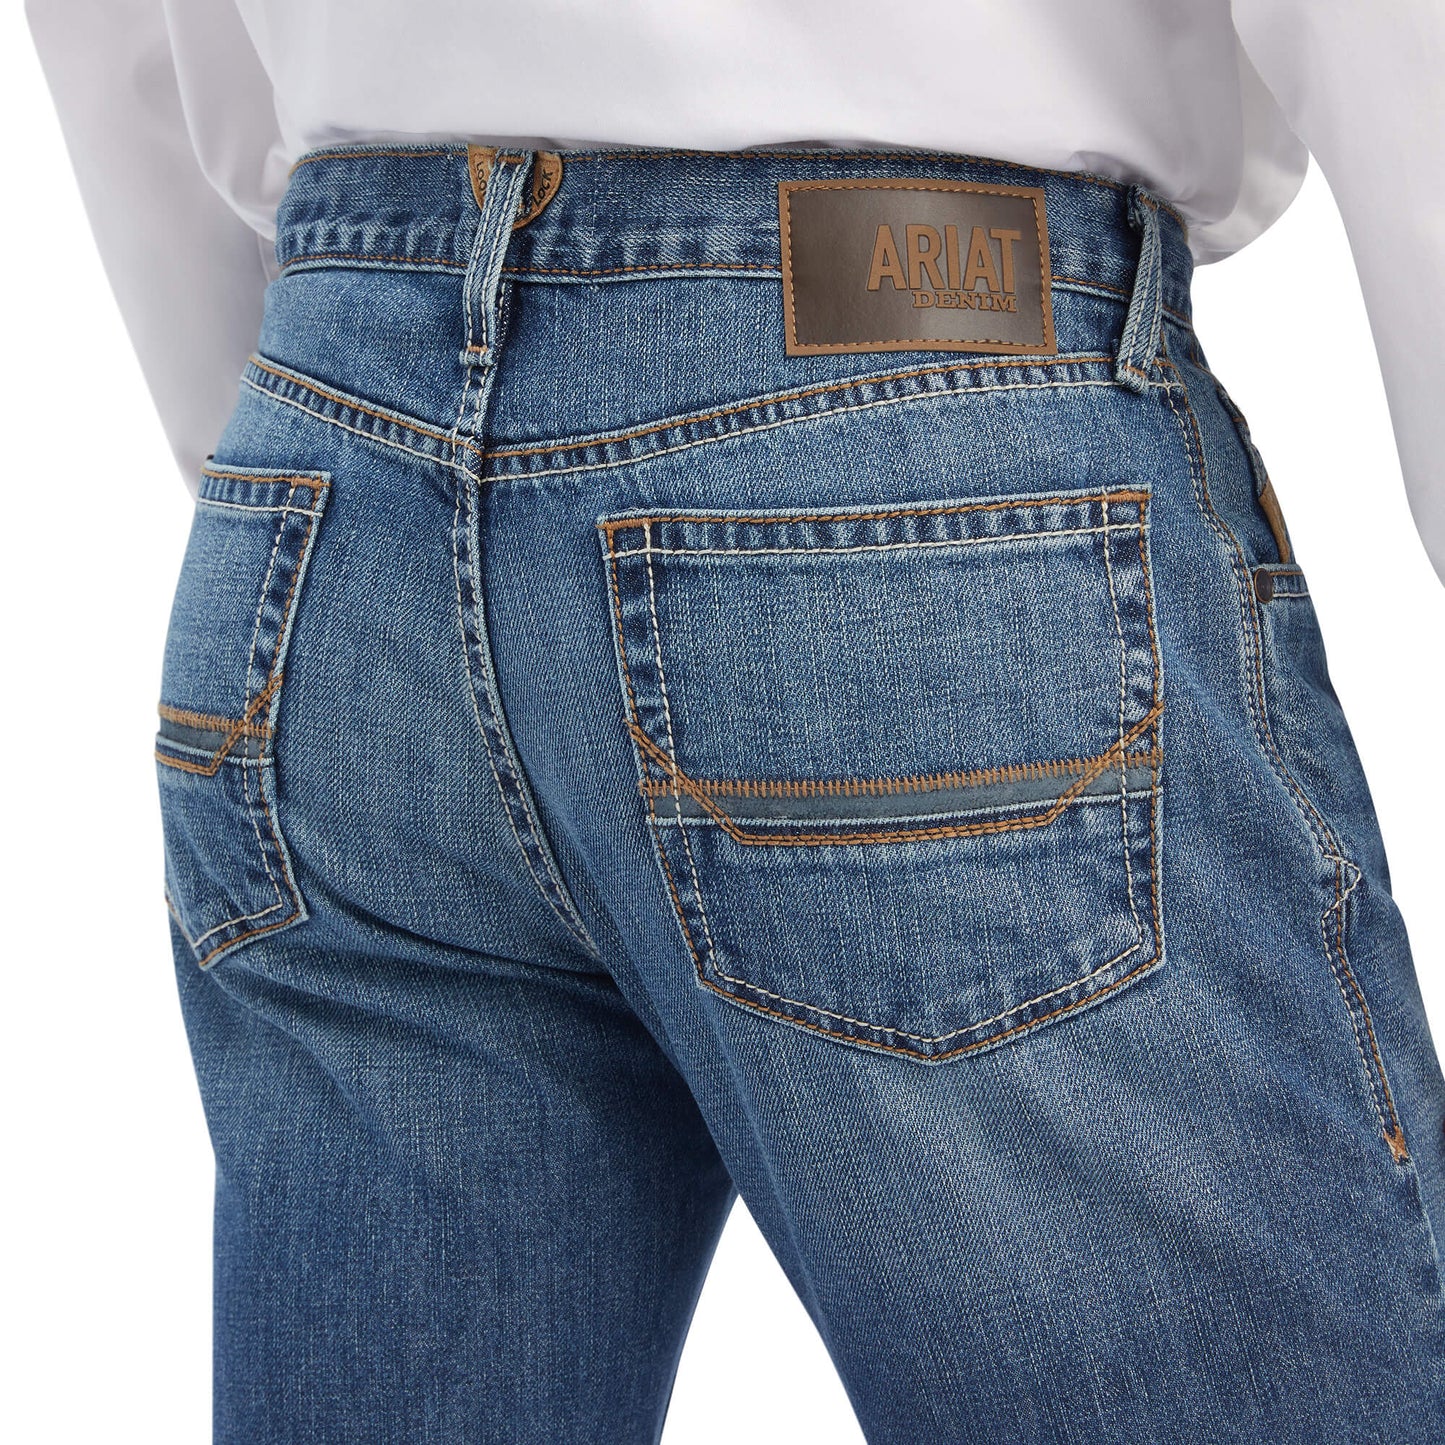 M4 RELAXED LANDRY STRAIGHT JEAN